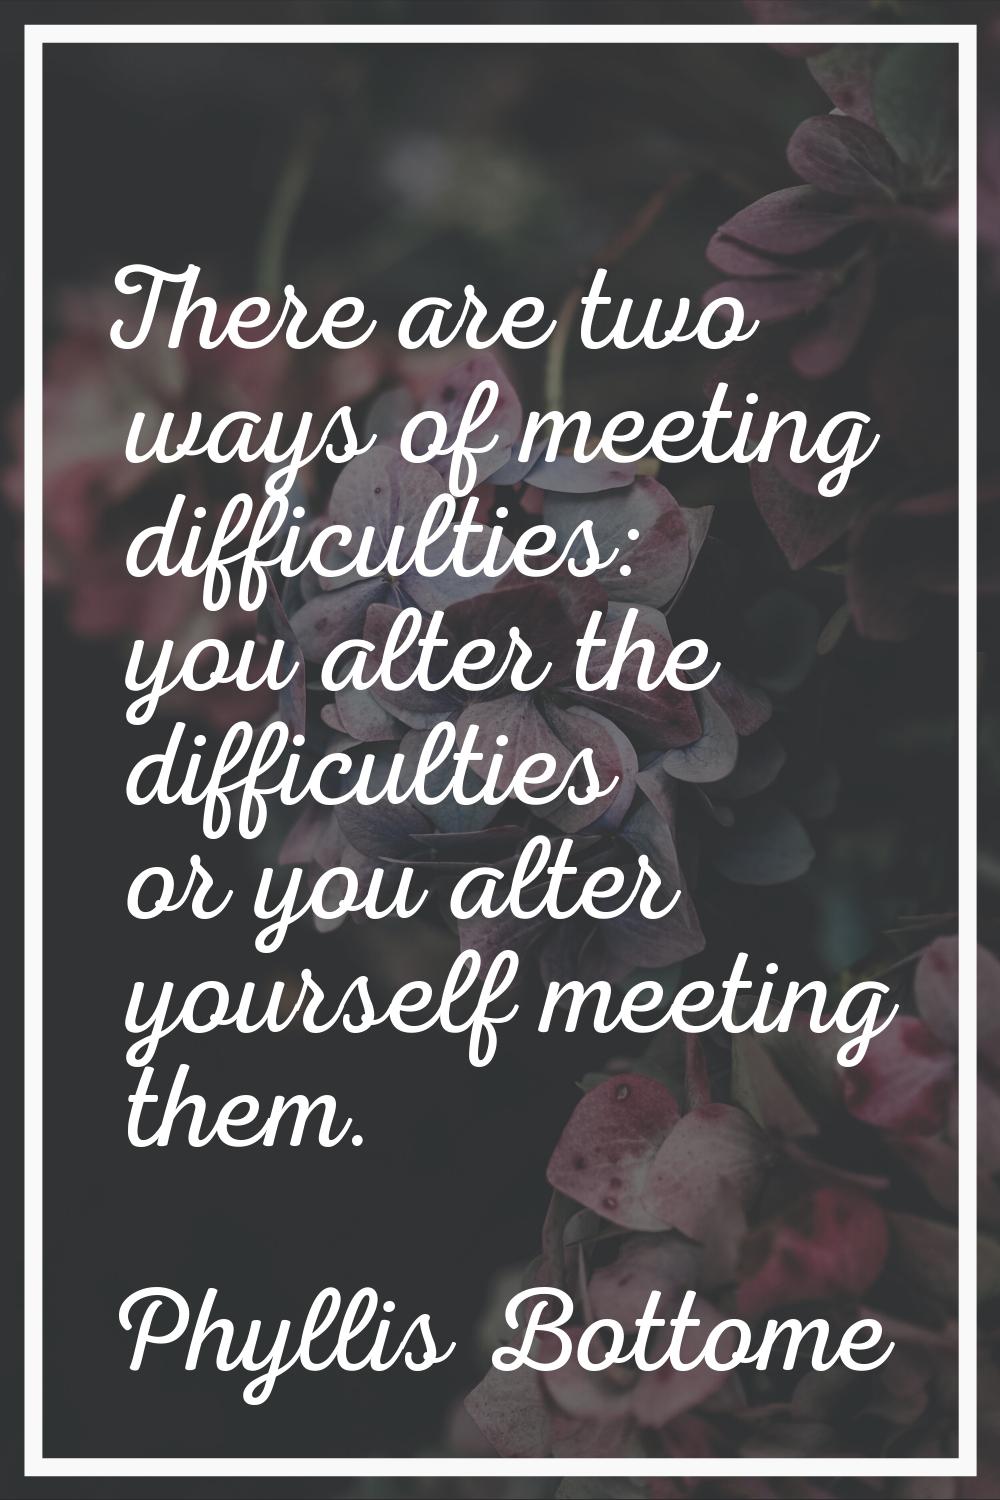 There are two ways of meeting difficulties: you alter the difficulties or you alter yourself meetin